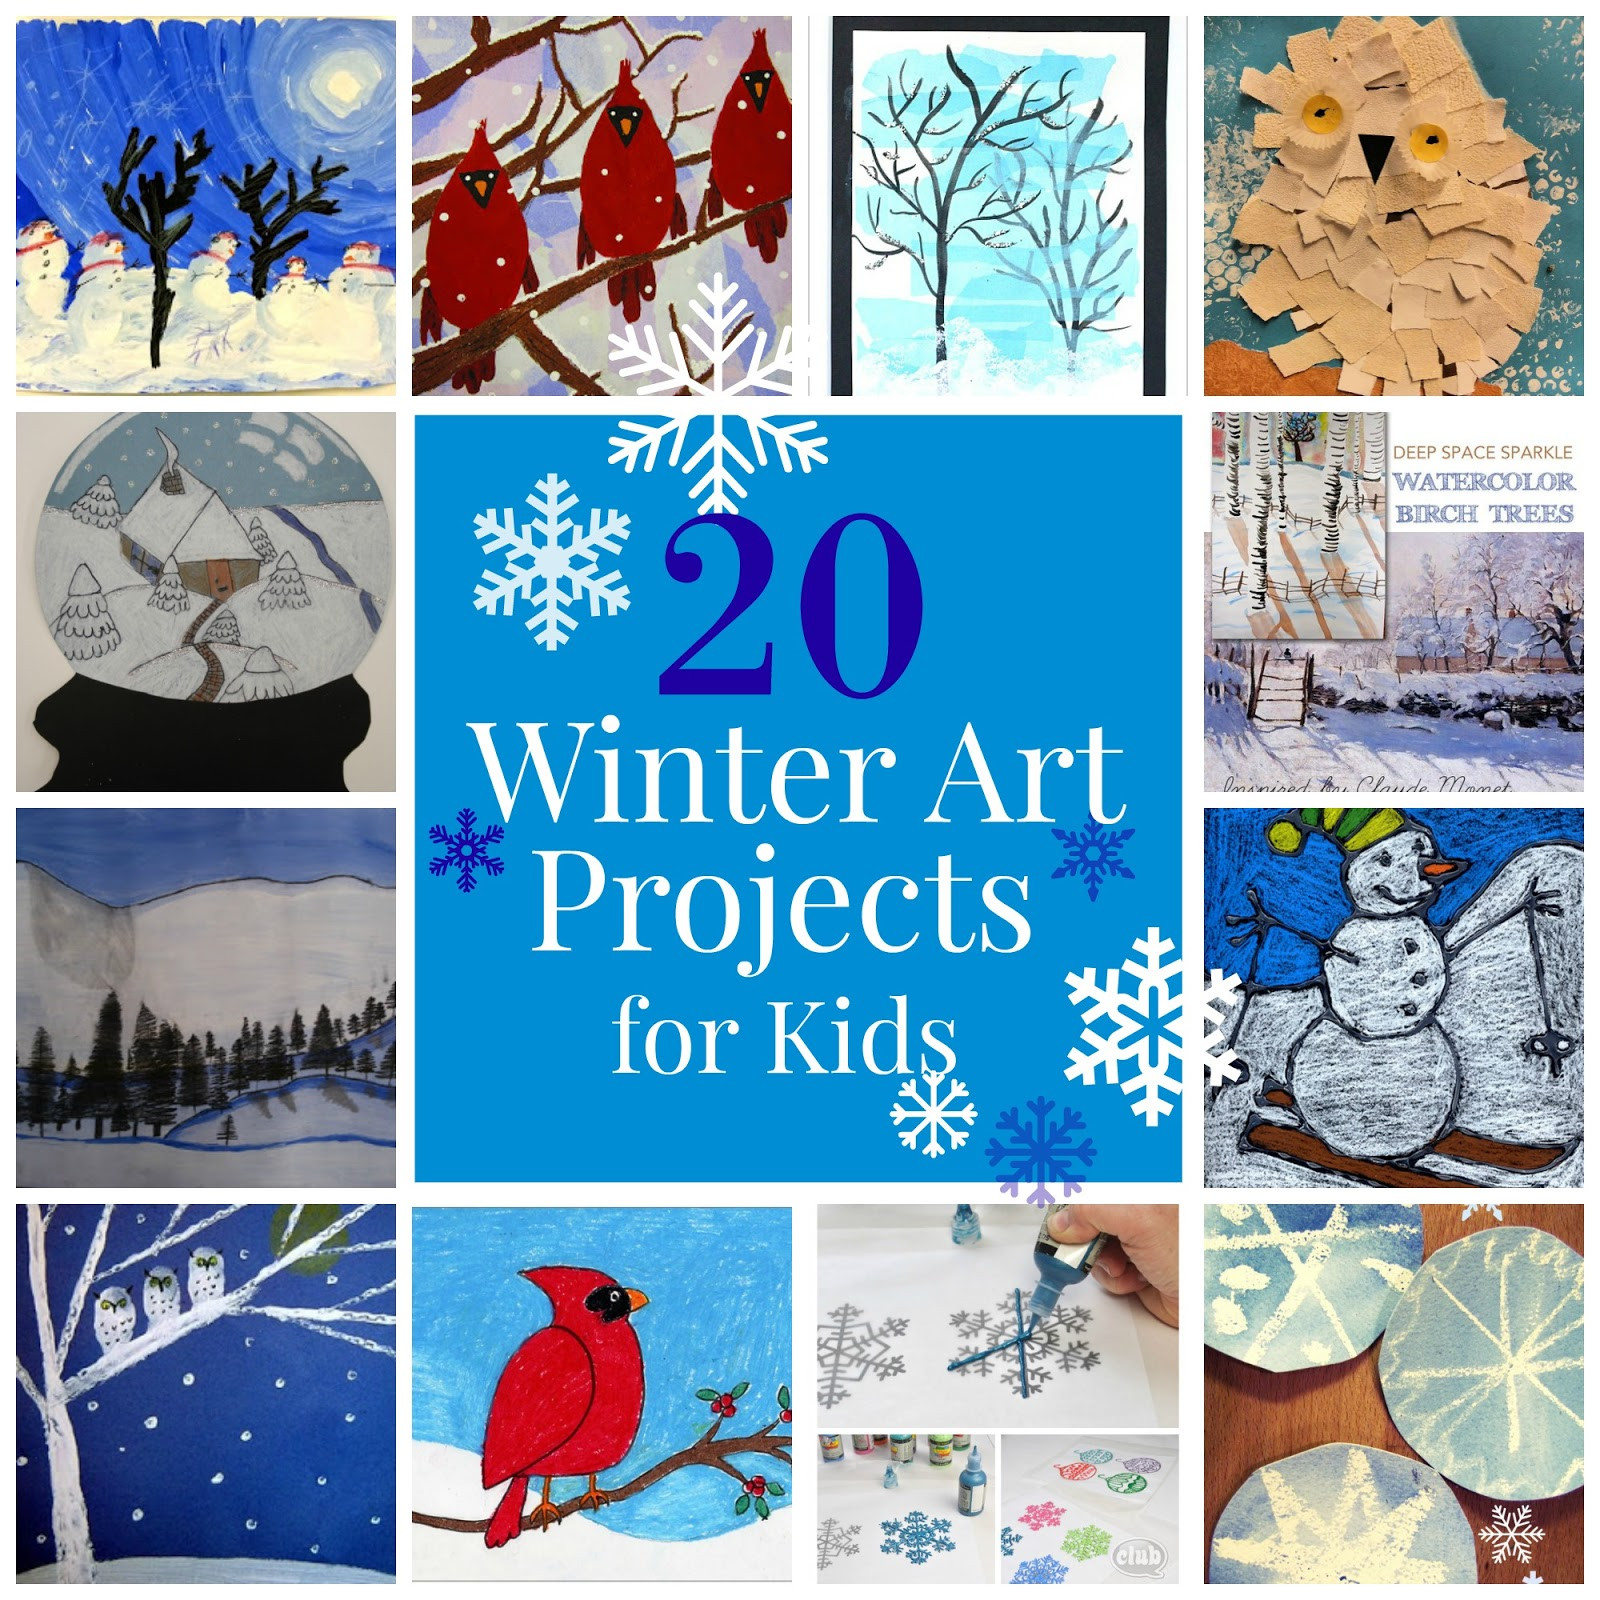 Winter Projects For Kids
 The Unlikely Homeschool 20 Winter Art Projects for Kids